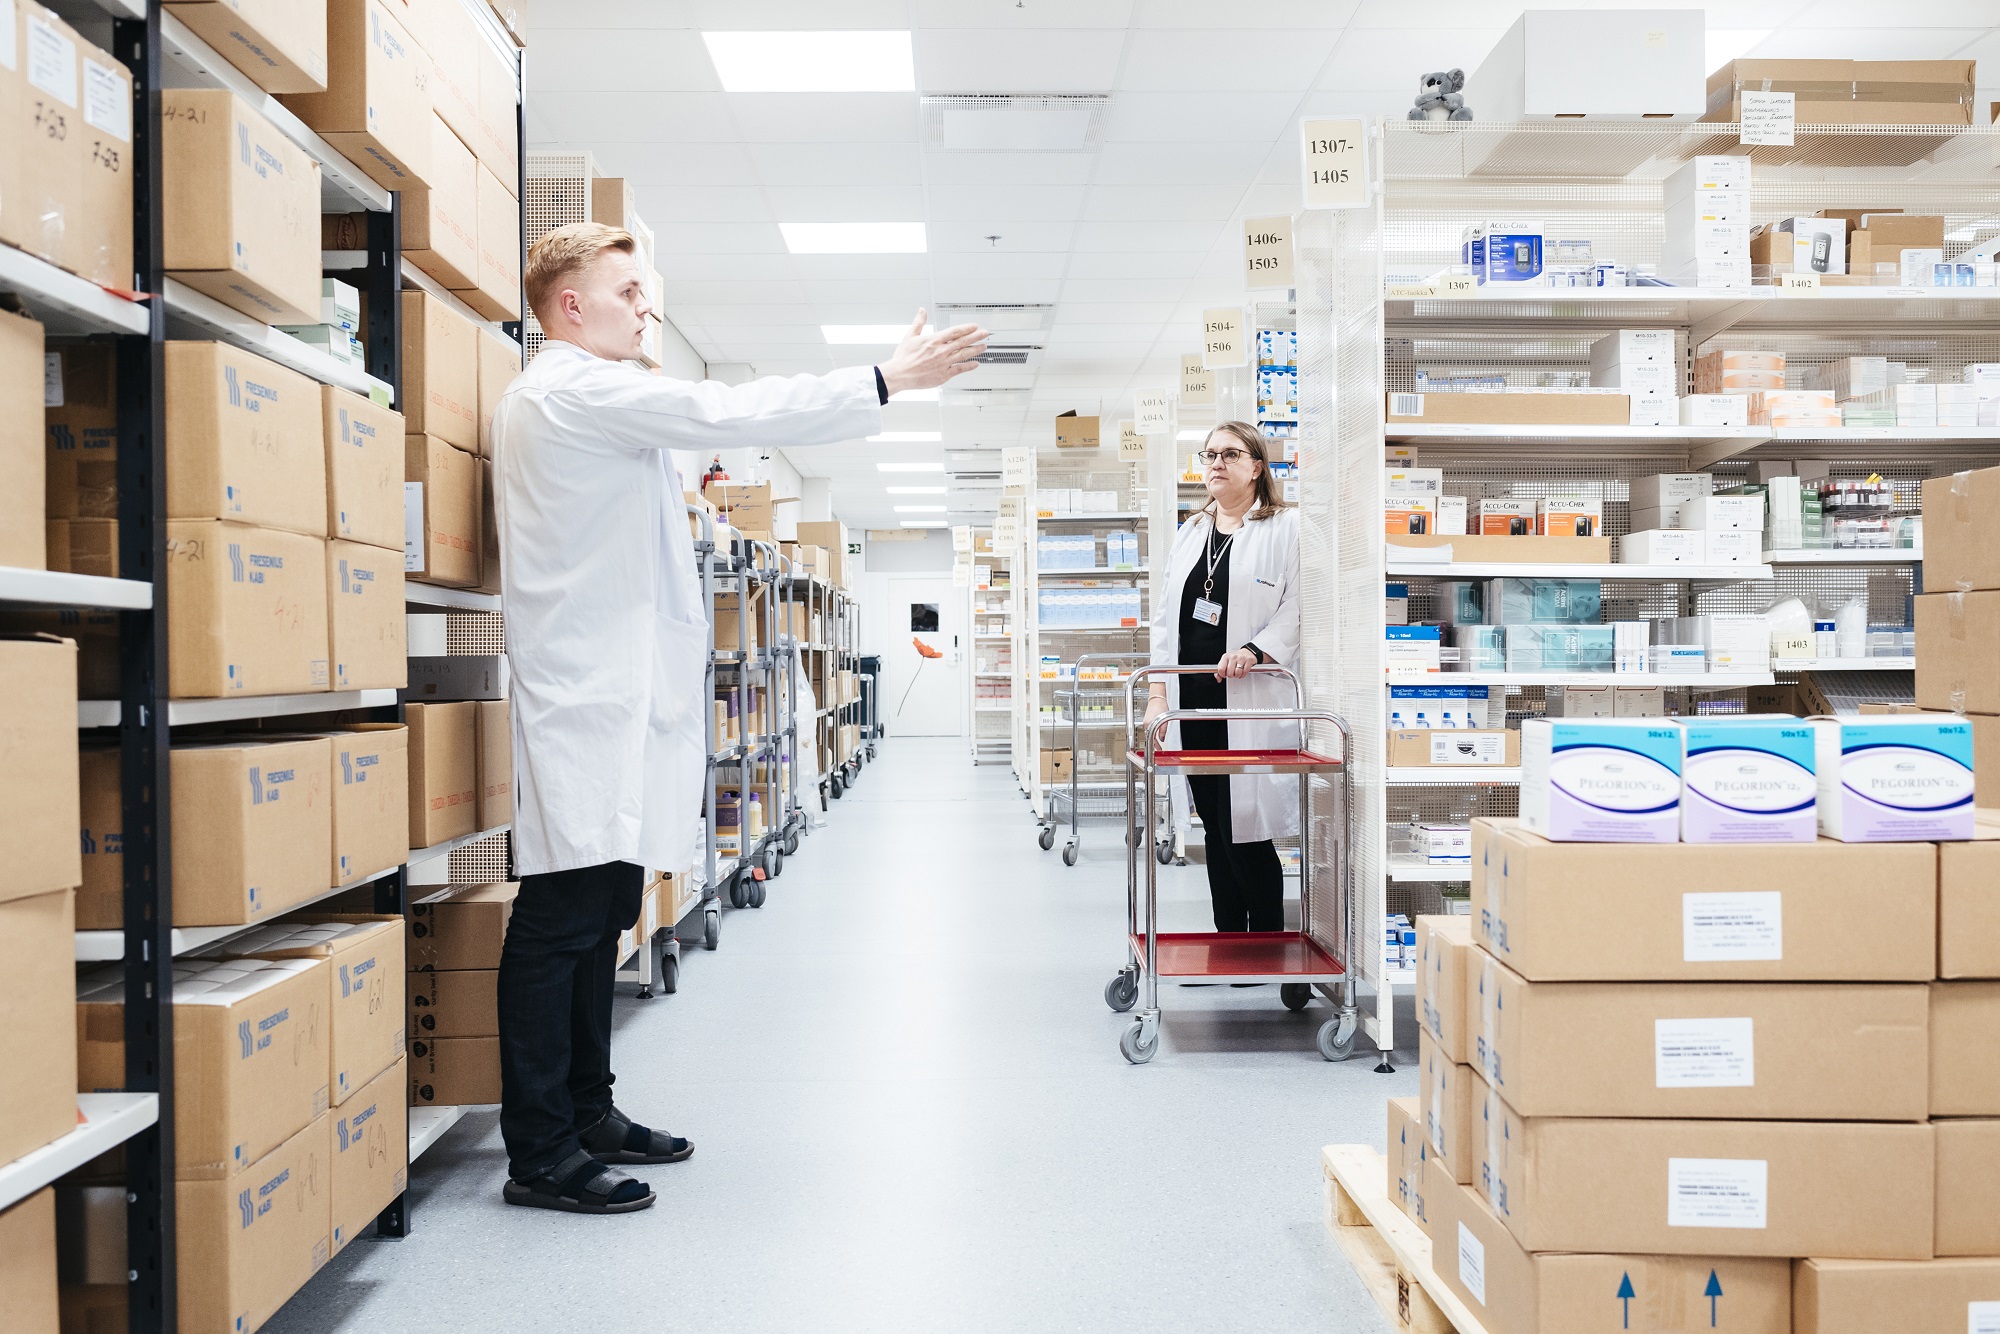 Tampere University Hospital to obtain the world’s largest automated dispensing system: Acquisition based on safety, efficiency and reliability of medicine supply